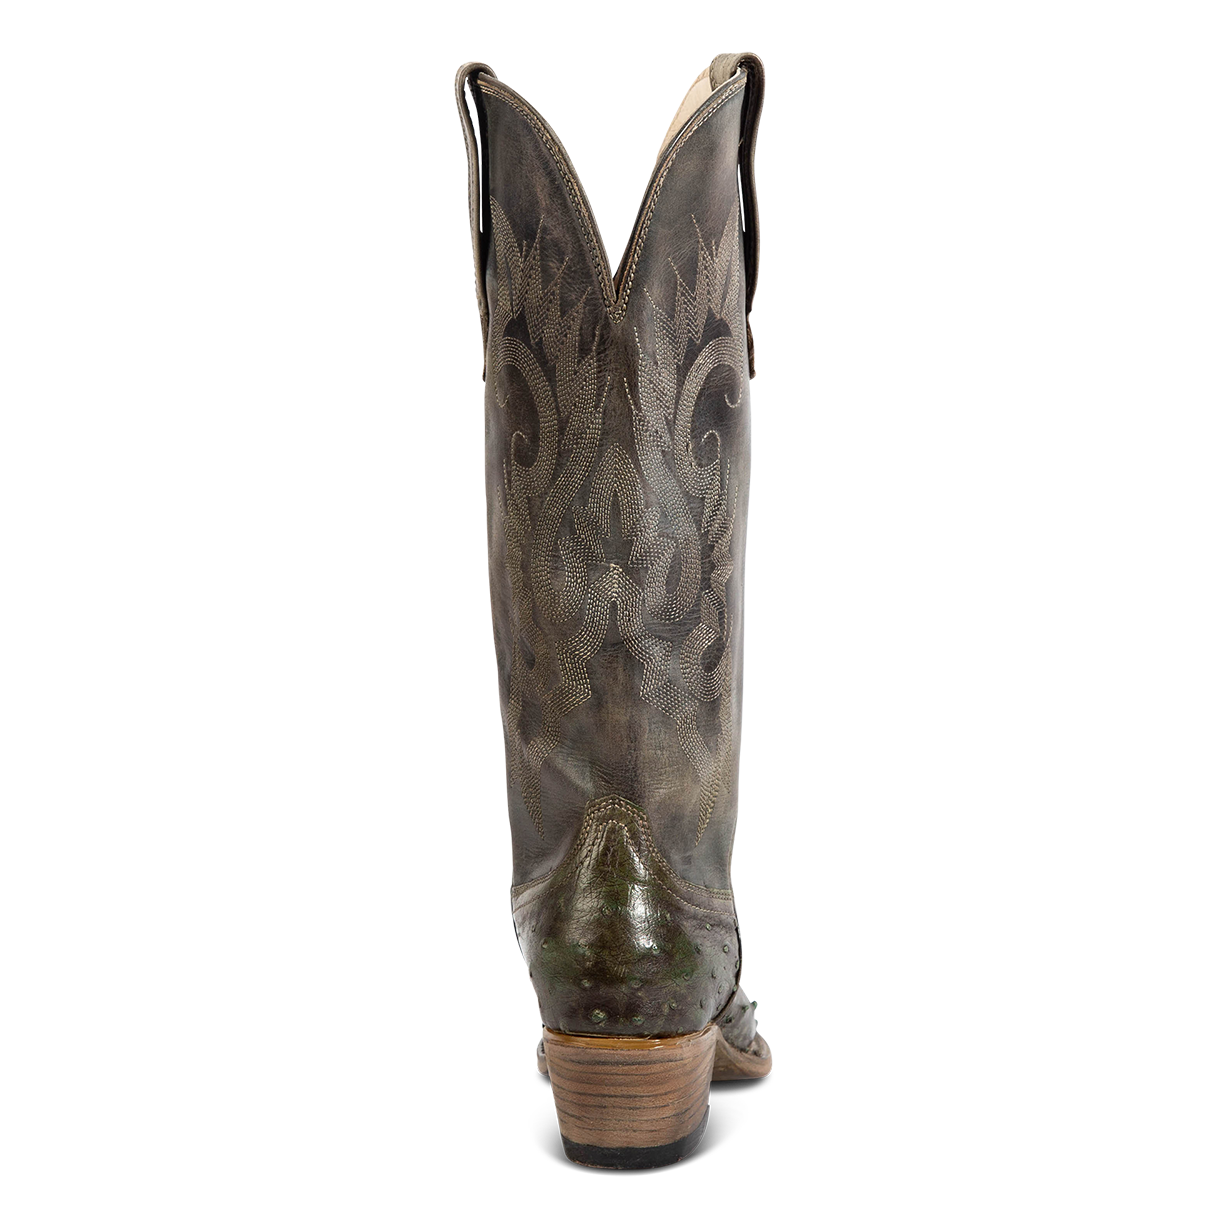 Back view showing back dip and leather heel with western stitch detailing on FREEBIRD women's Woodland green ostrich leather boot